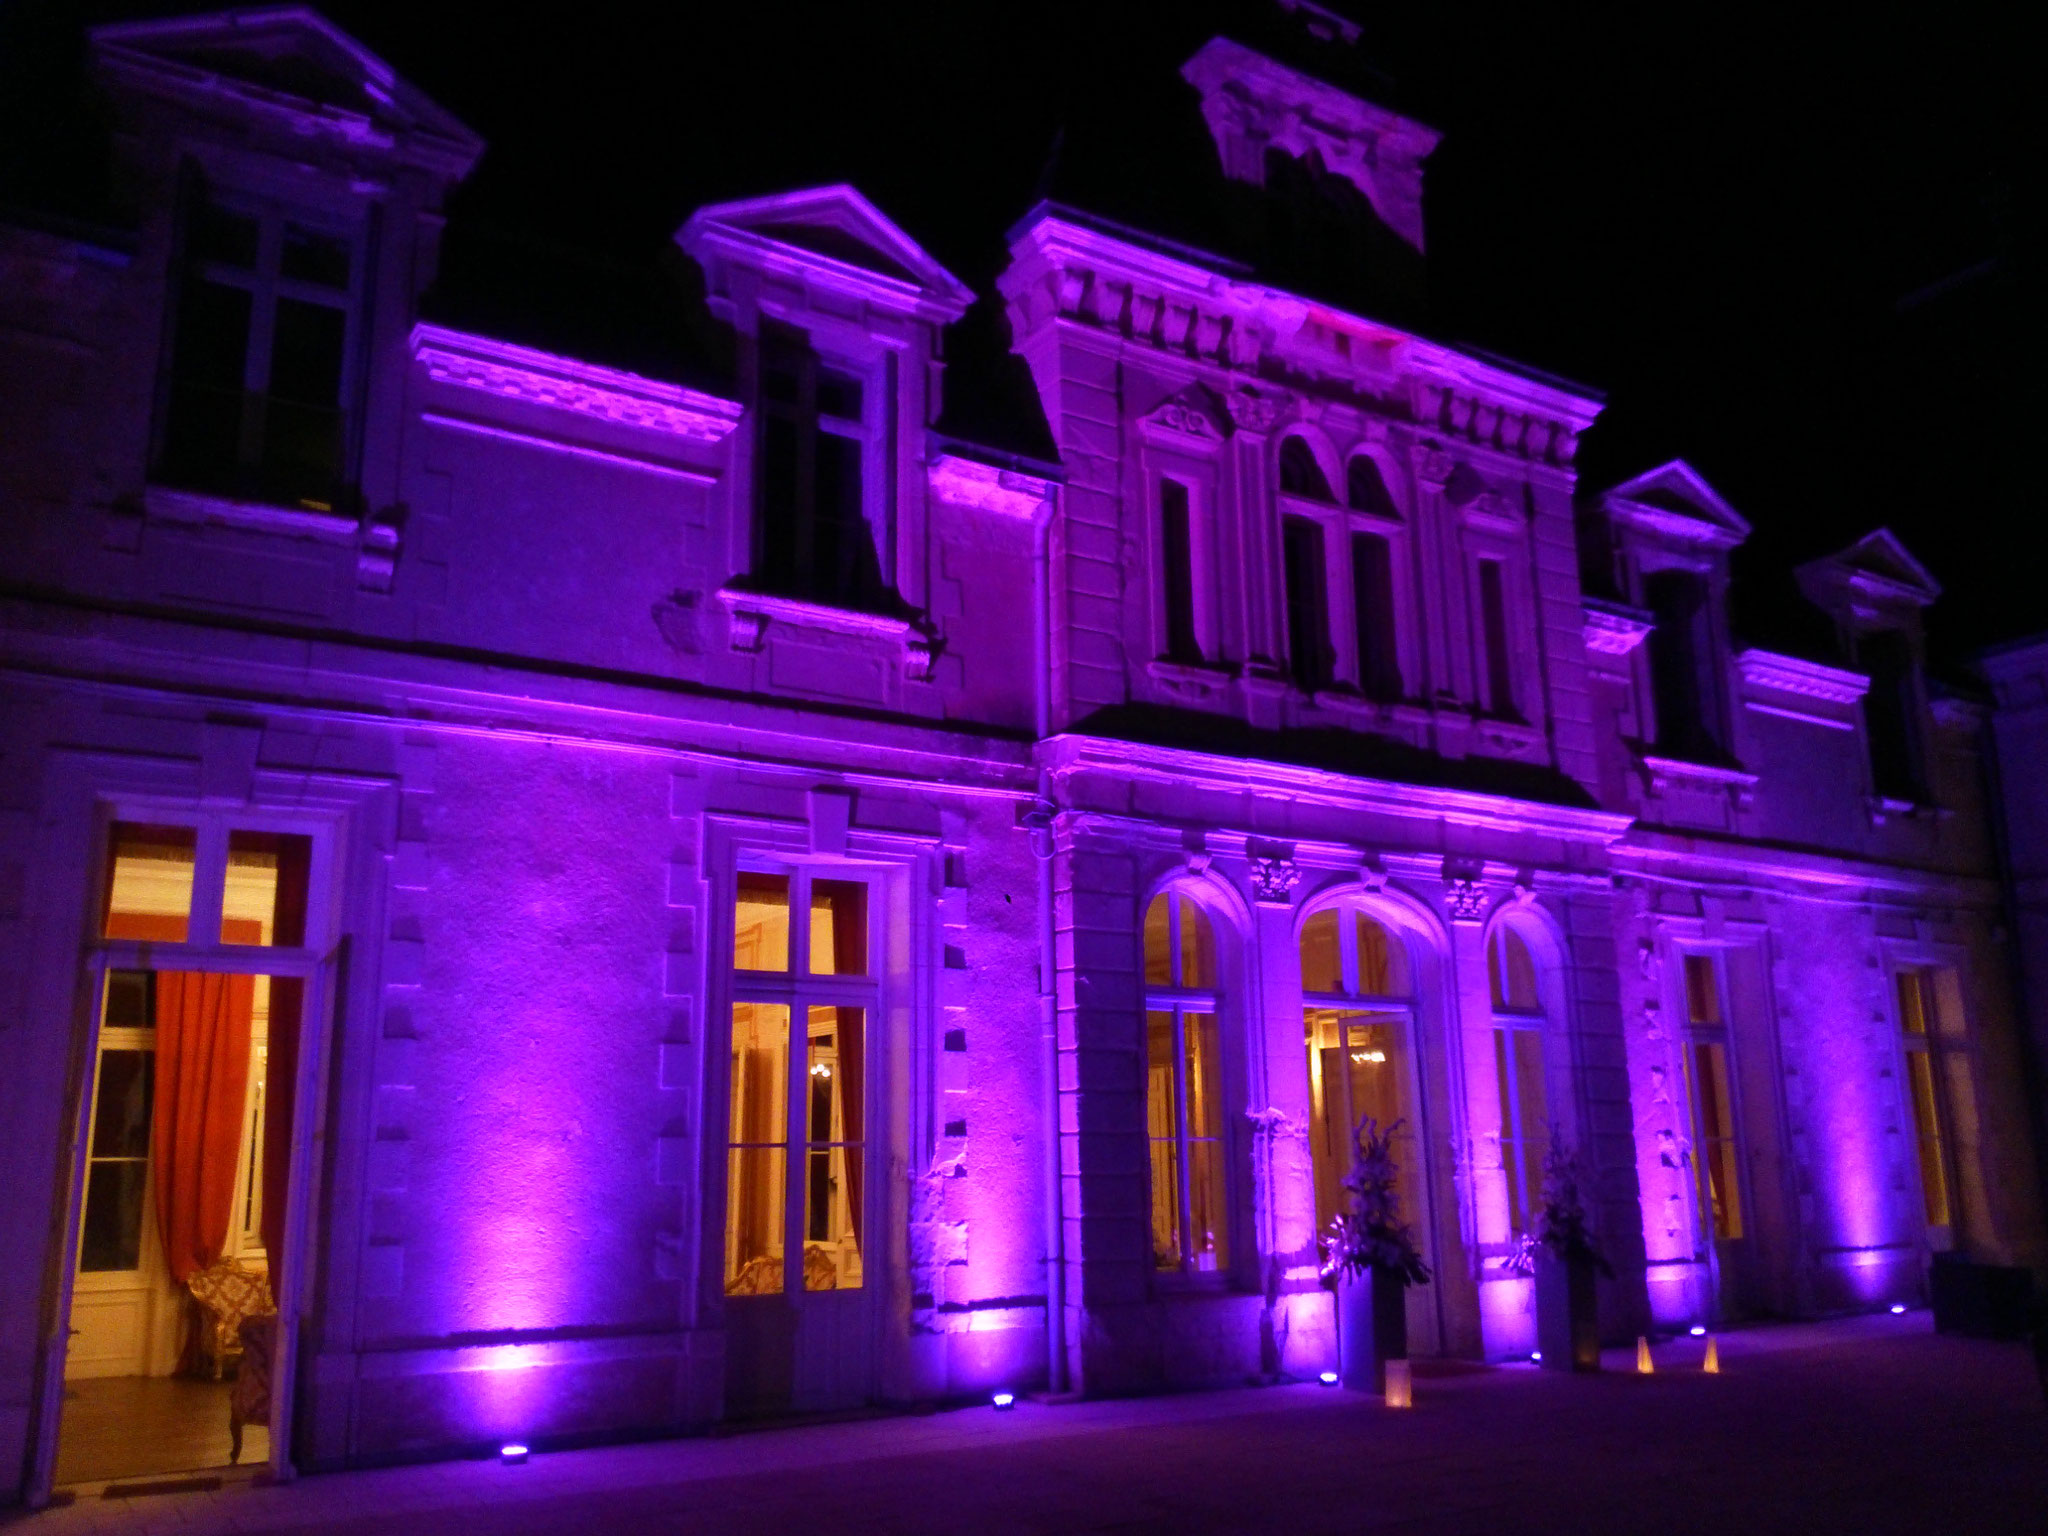 Eclairage chateau rose